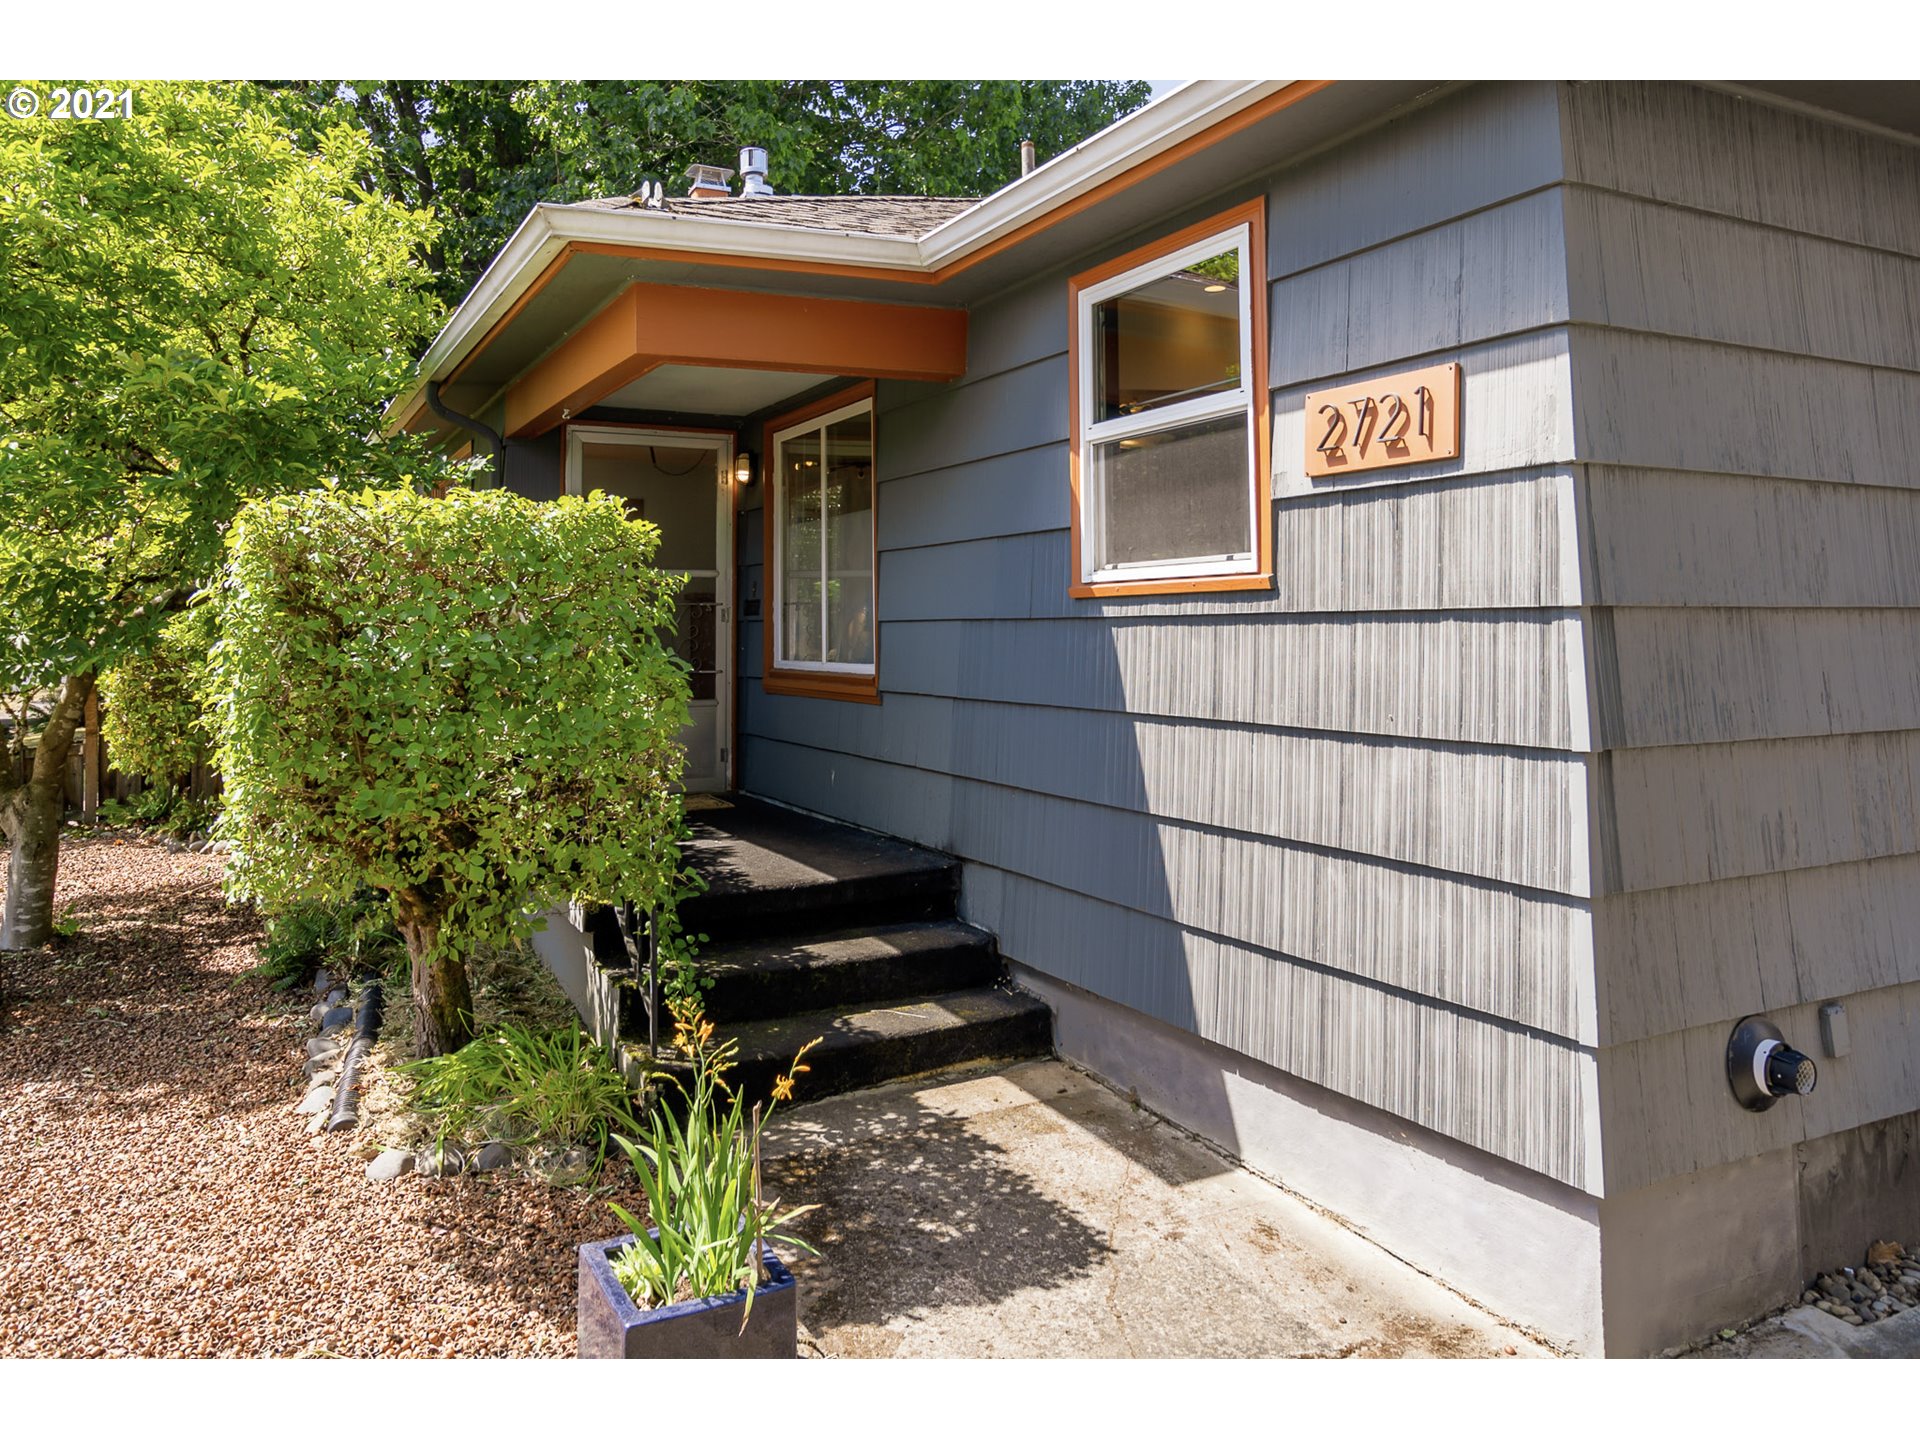 2721 SE 64TH AVE (1 of 31)